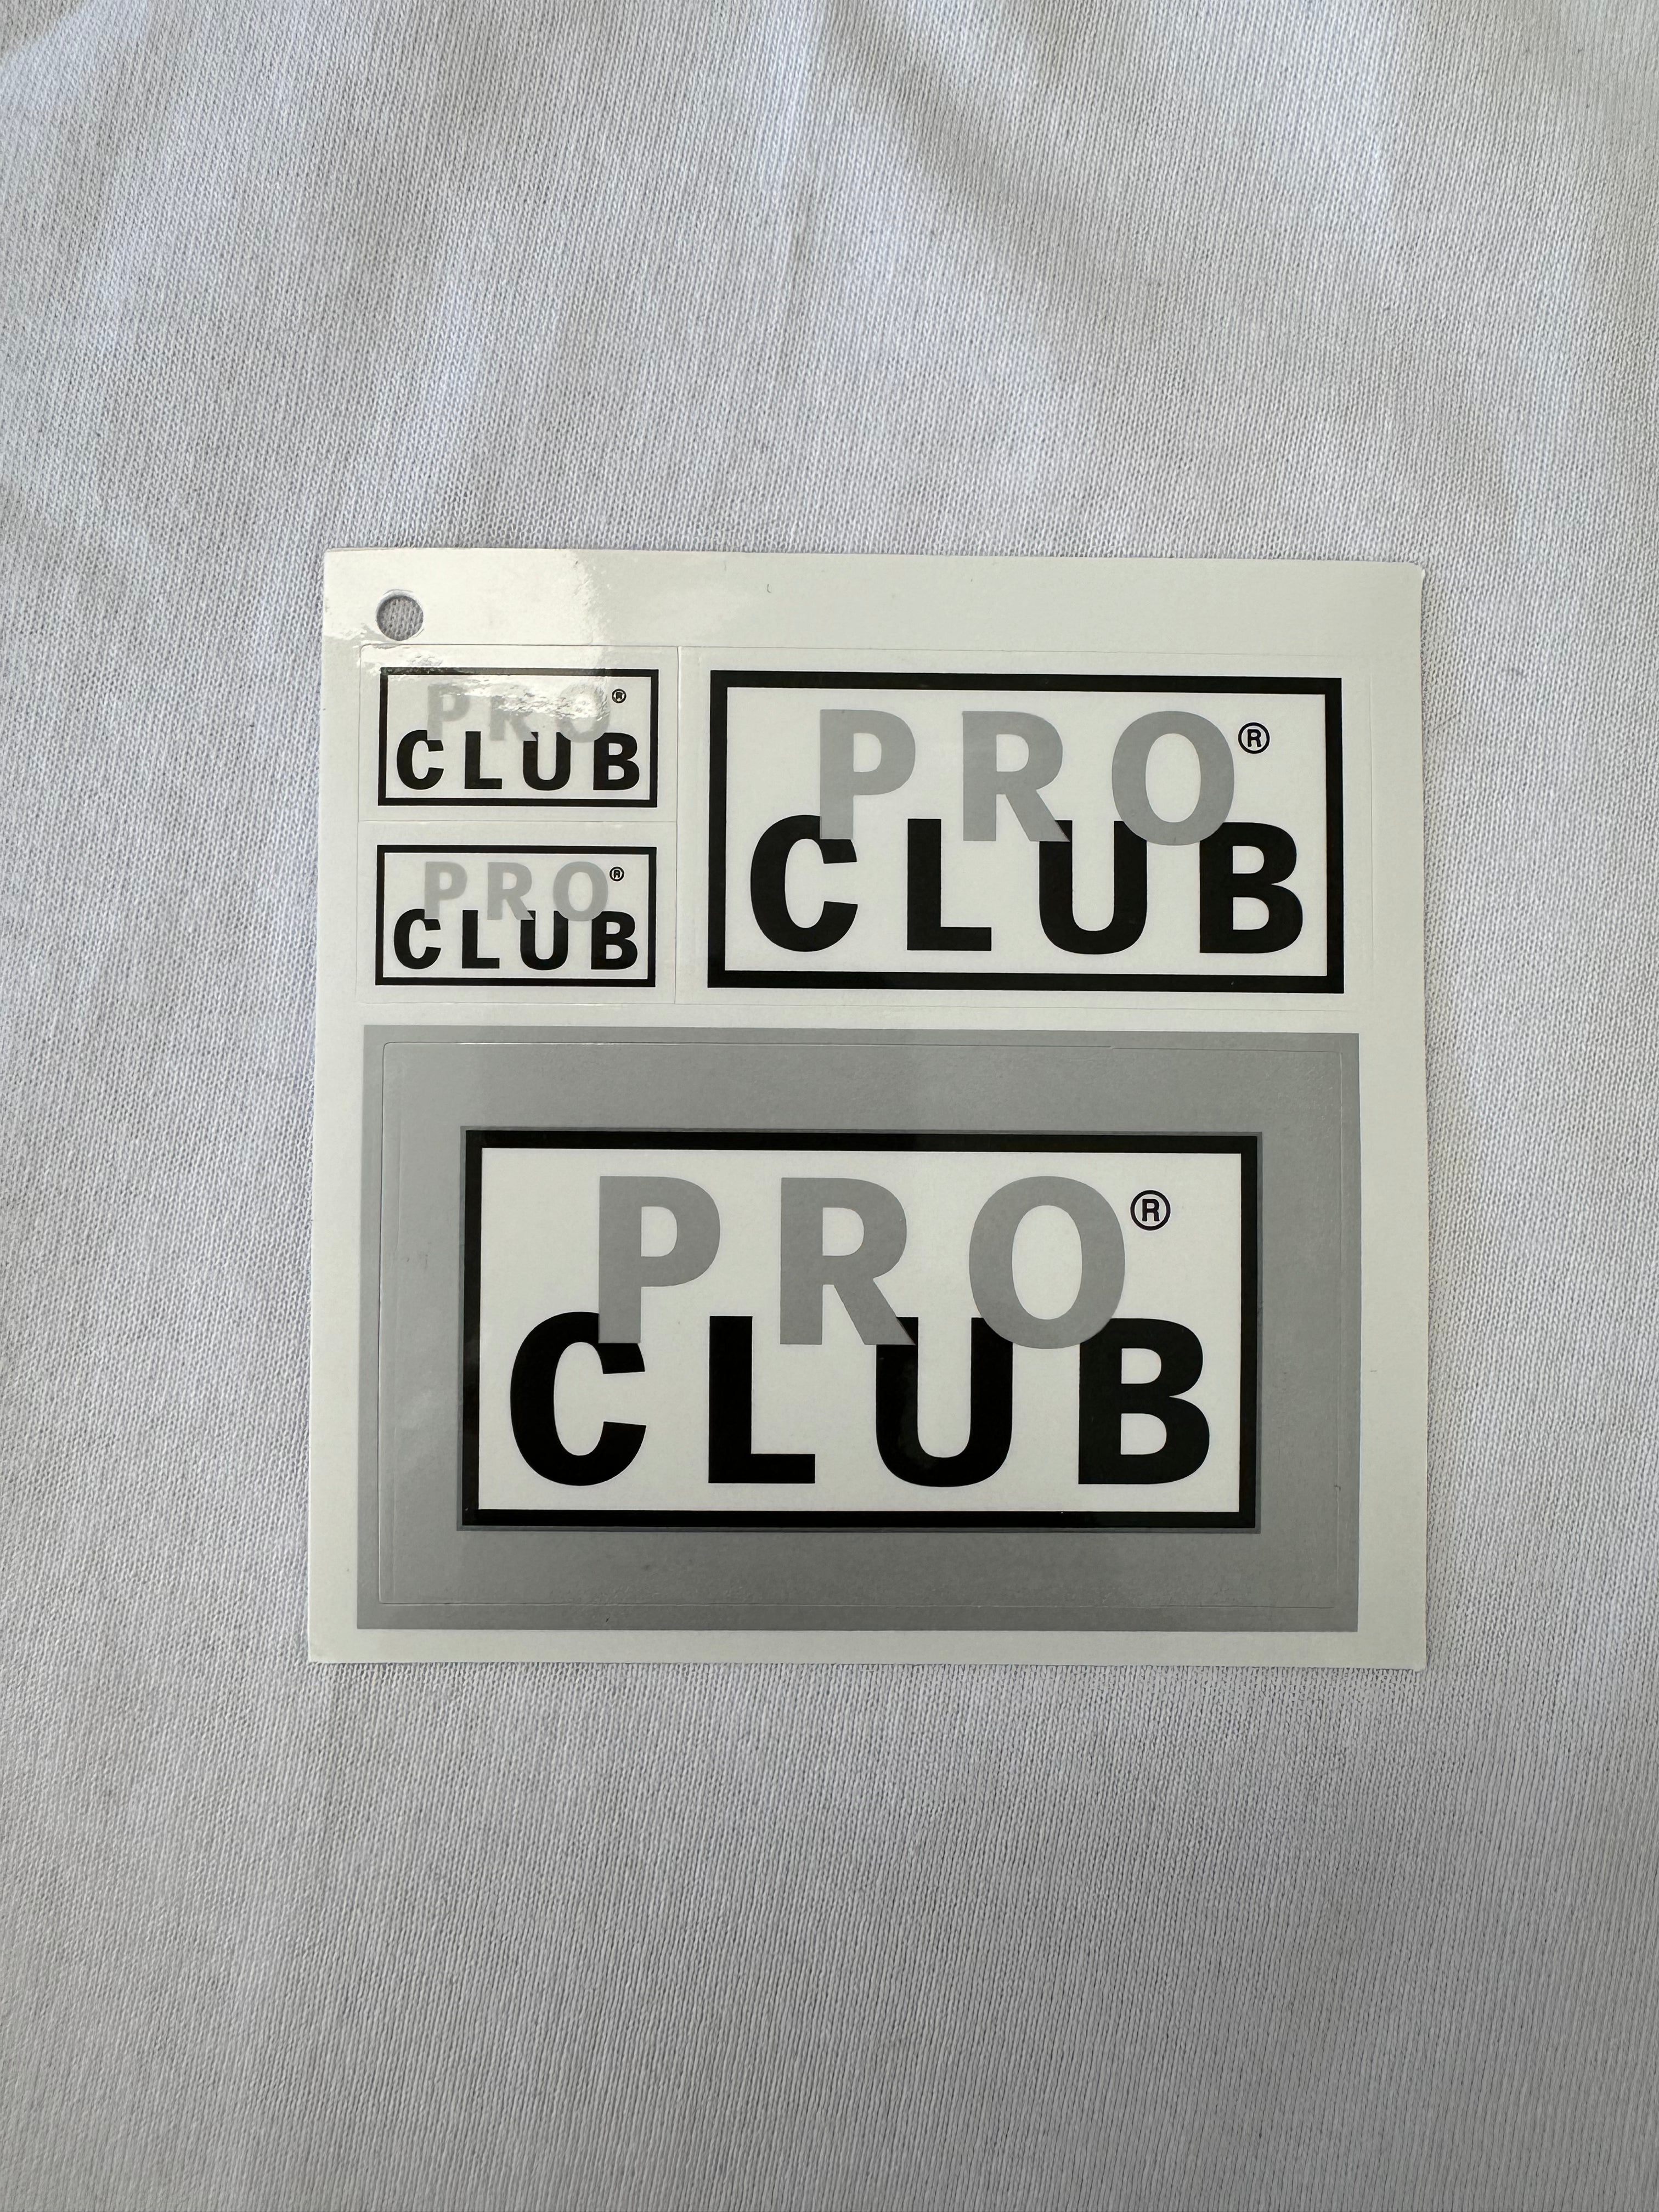 Customize Your Gear with Pro Club Stickers, Pack of 3 Different Designs